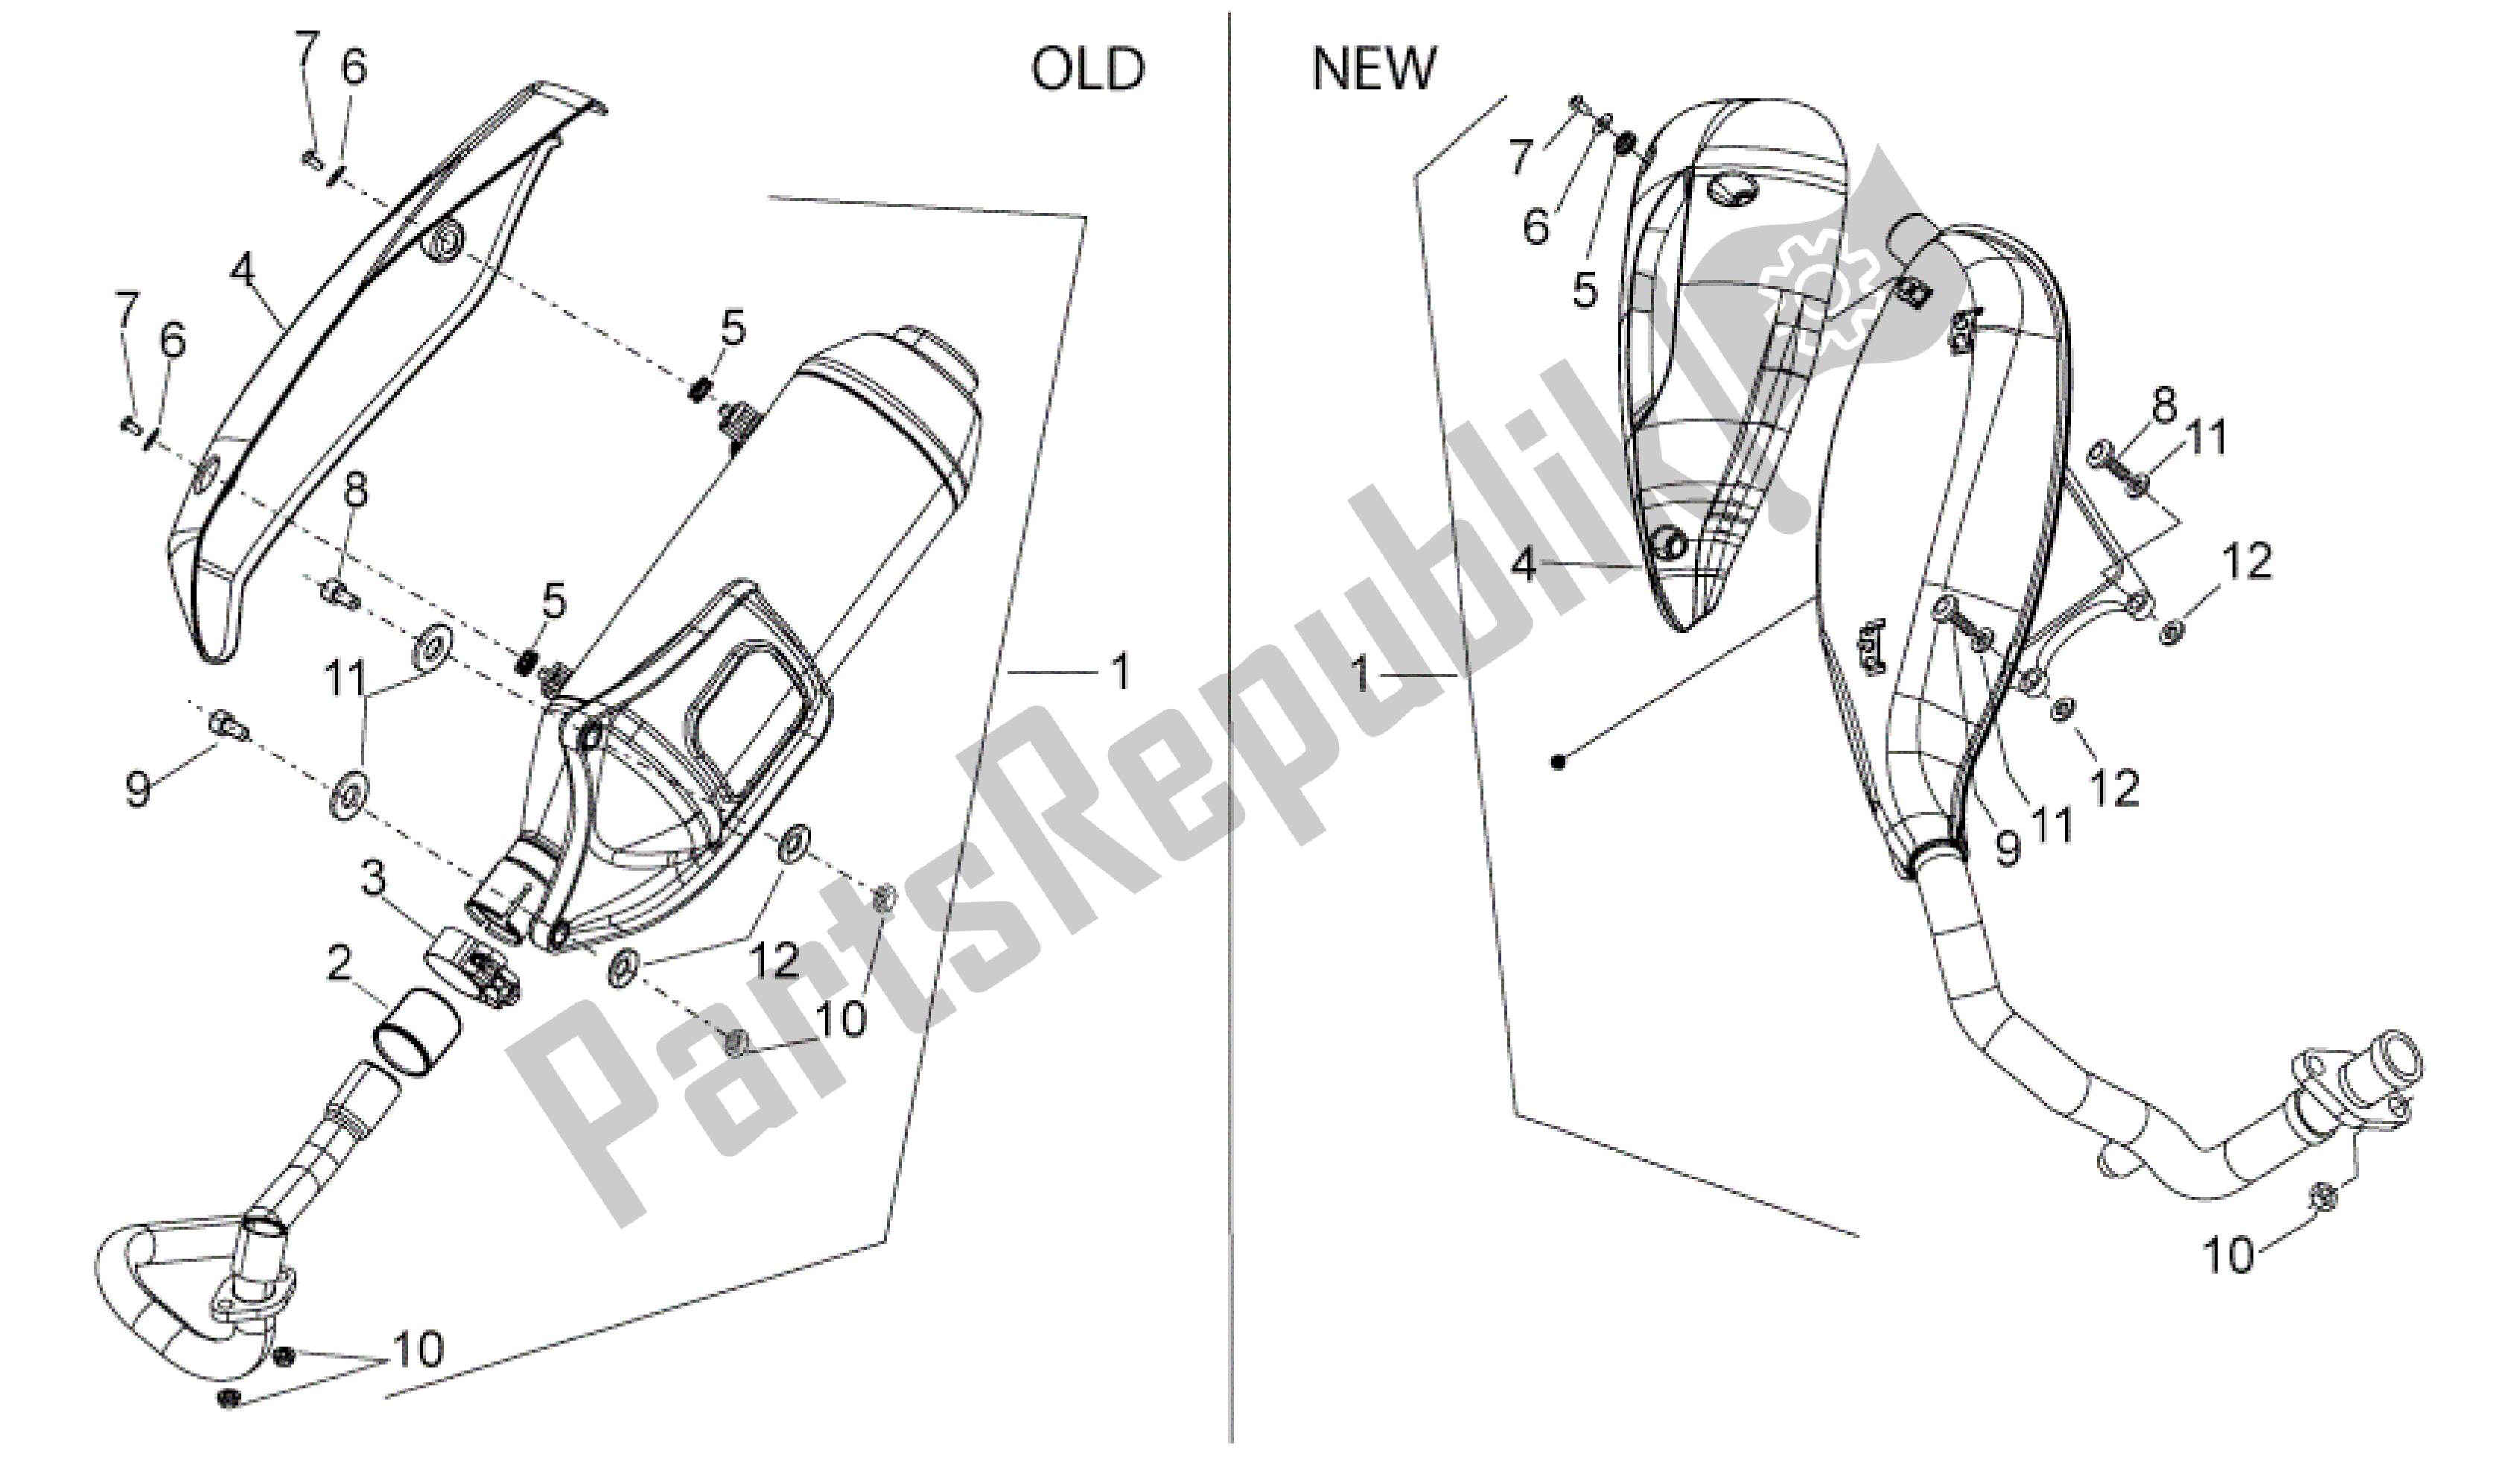 All parts for the Exhaust Unit of the Aprilia Sport City 125 2008 - 2010